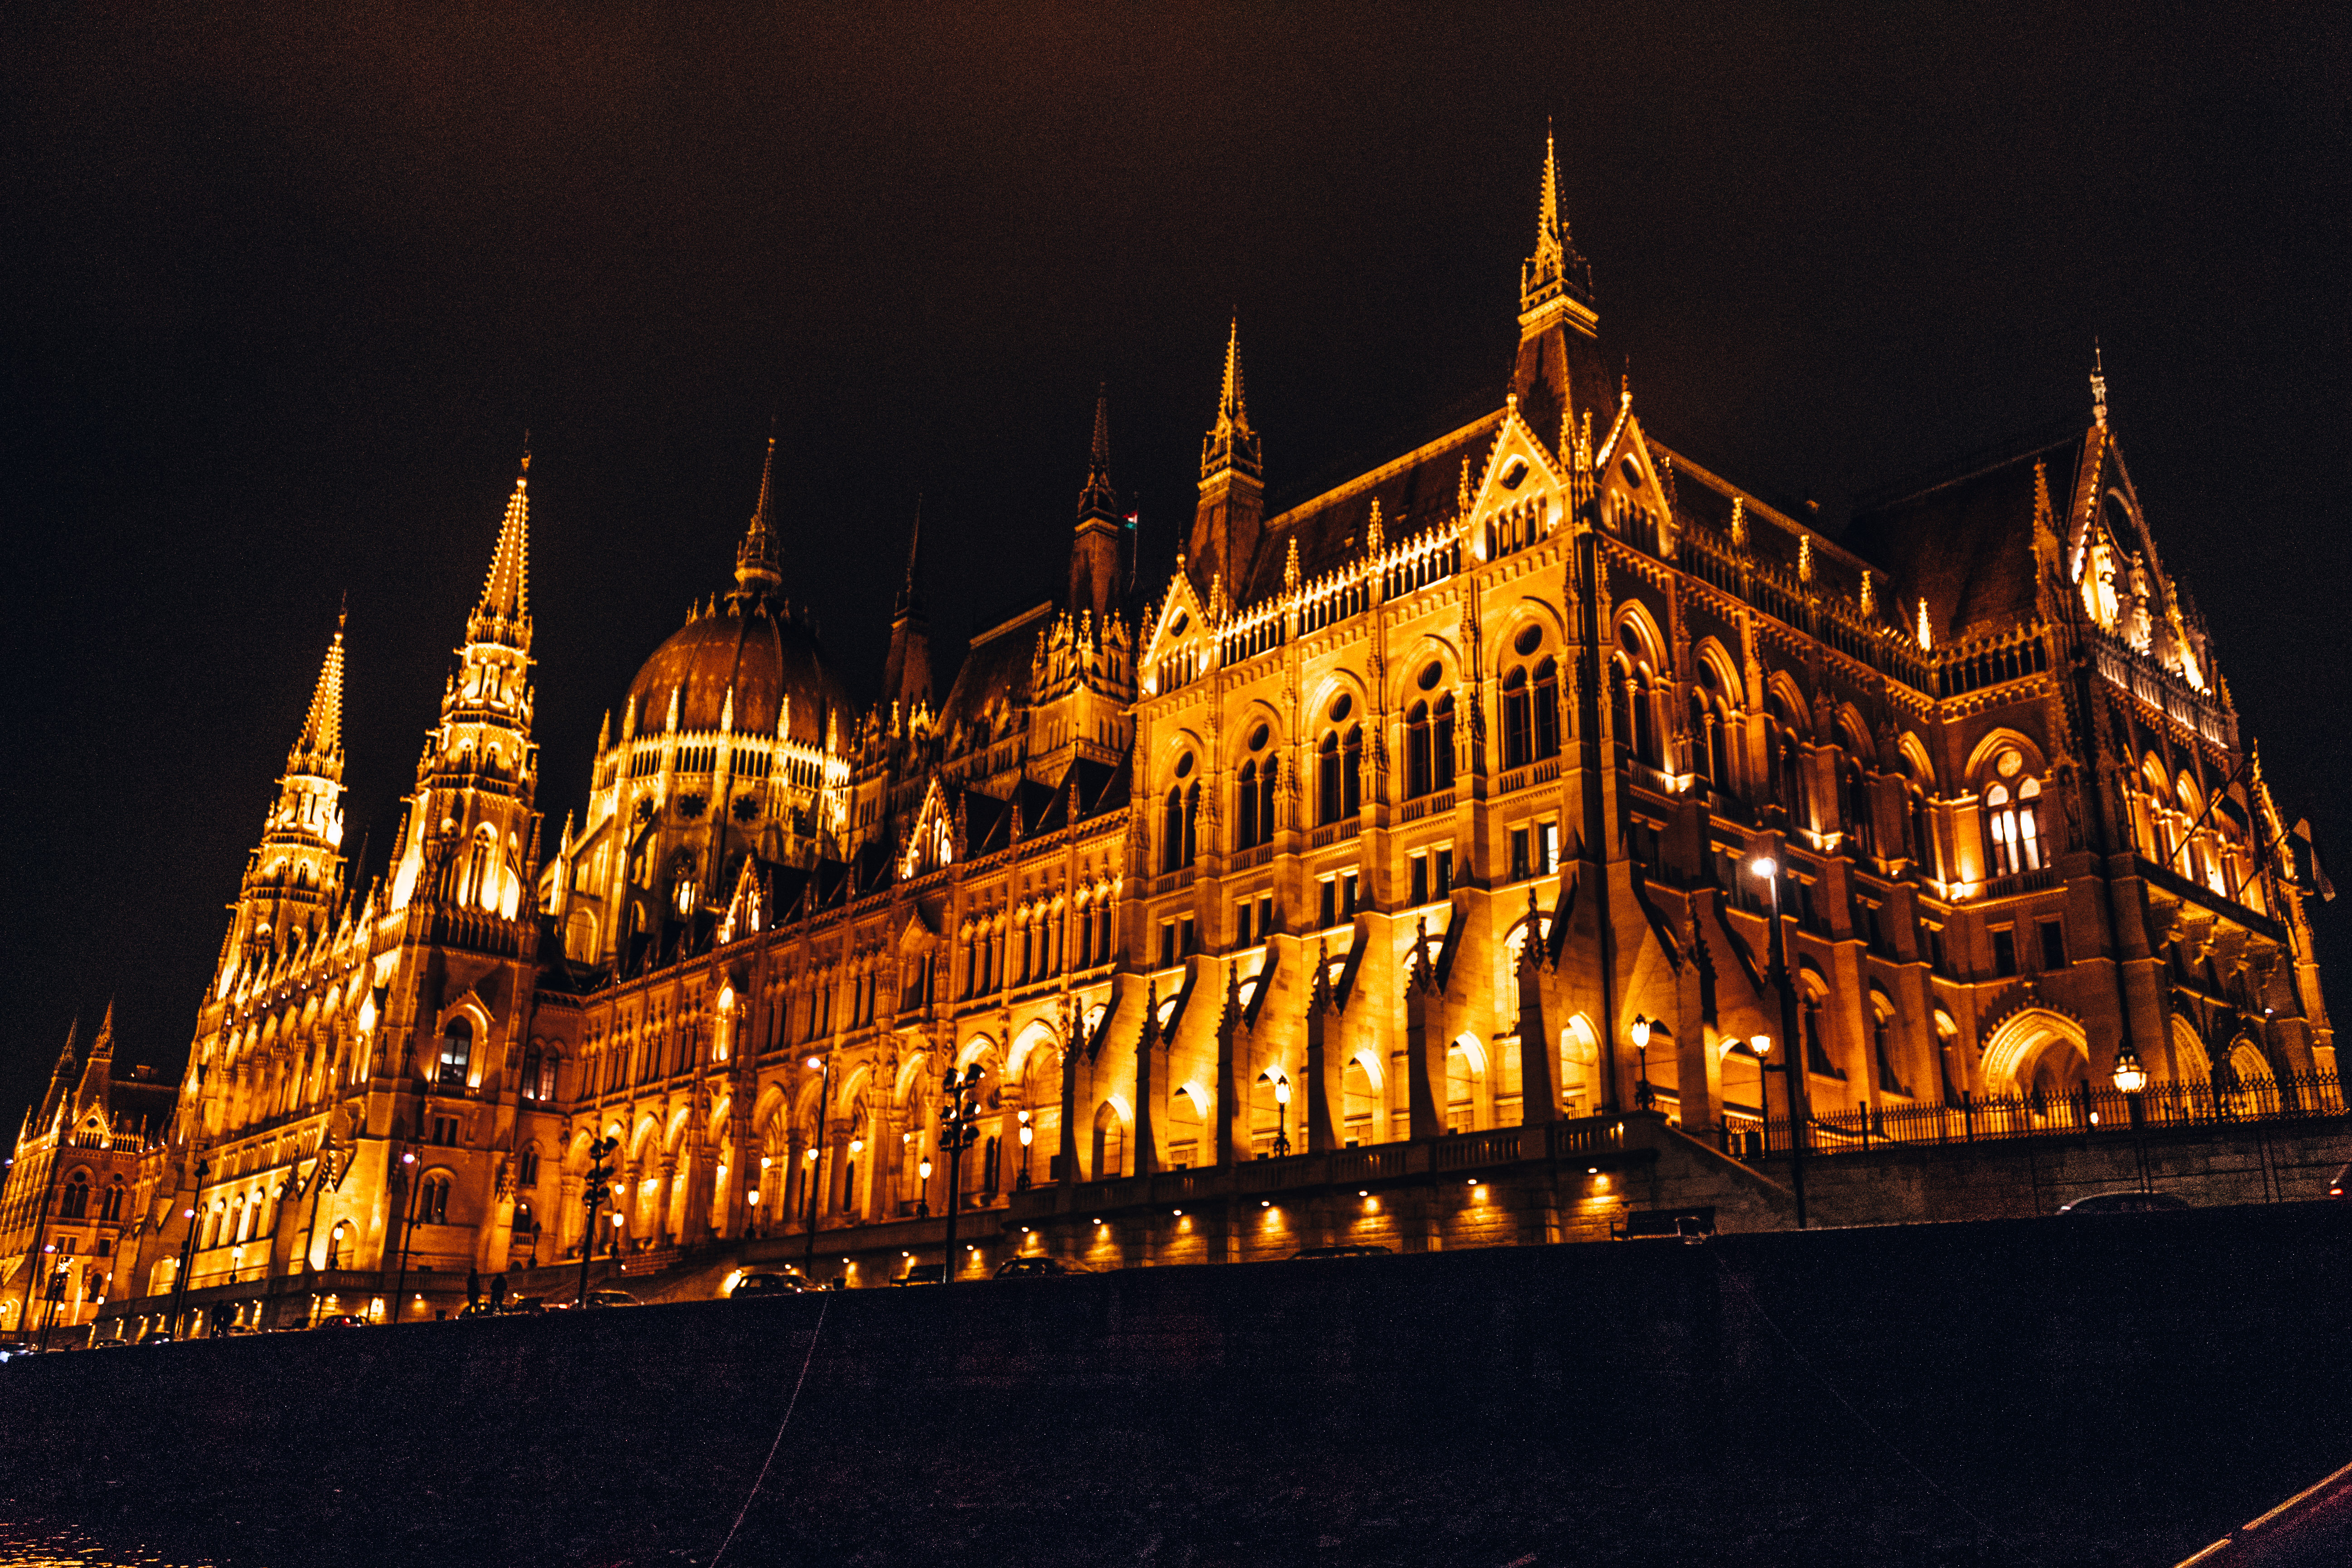 The Hungarian Parliament building all lit up at night in Budapest, Hungary